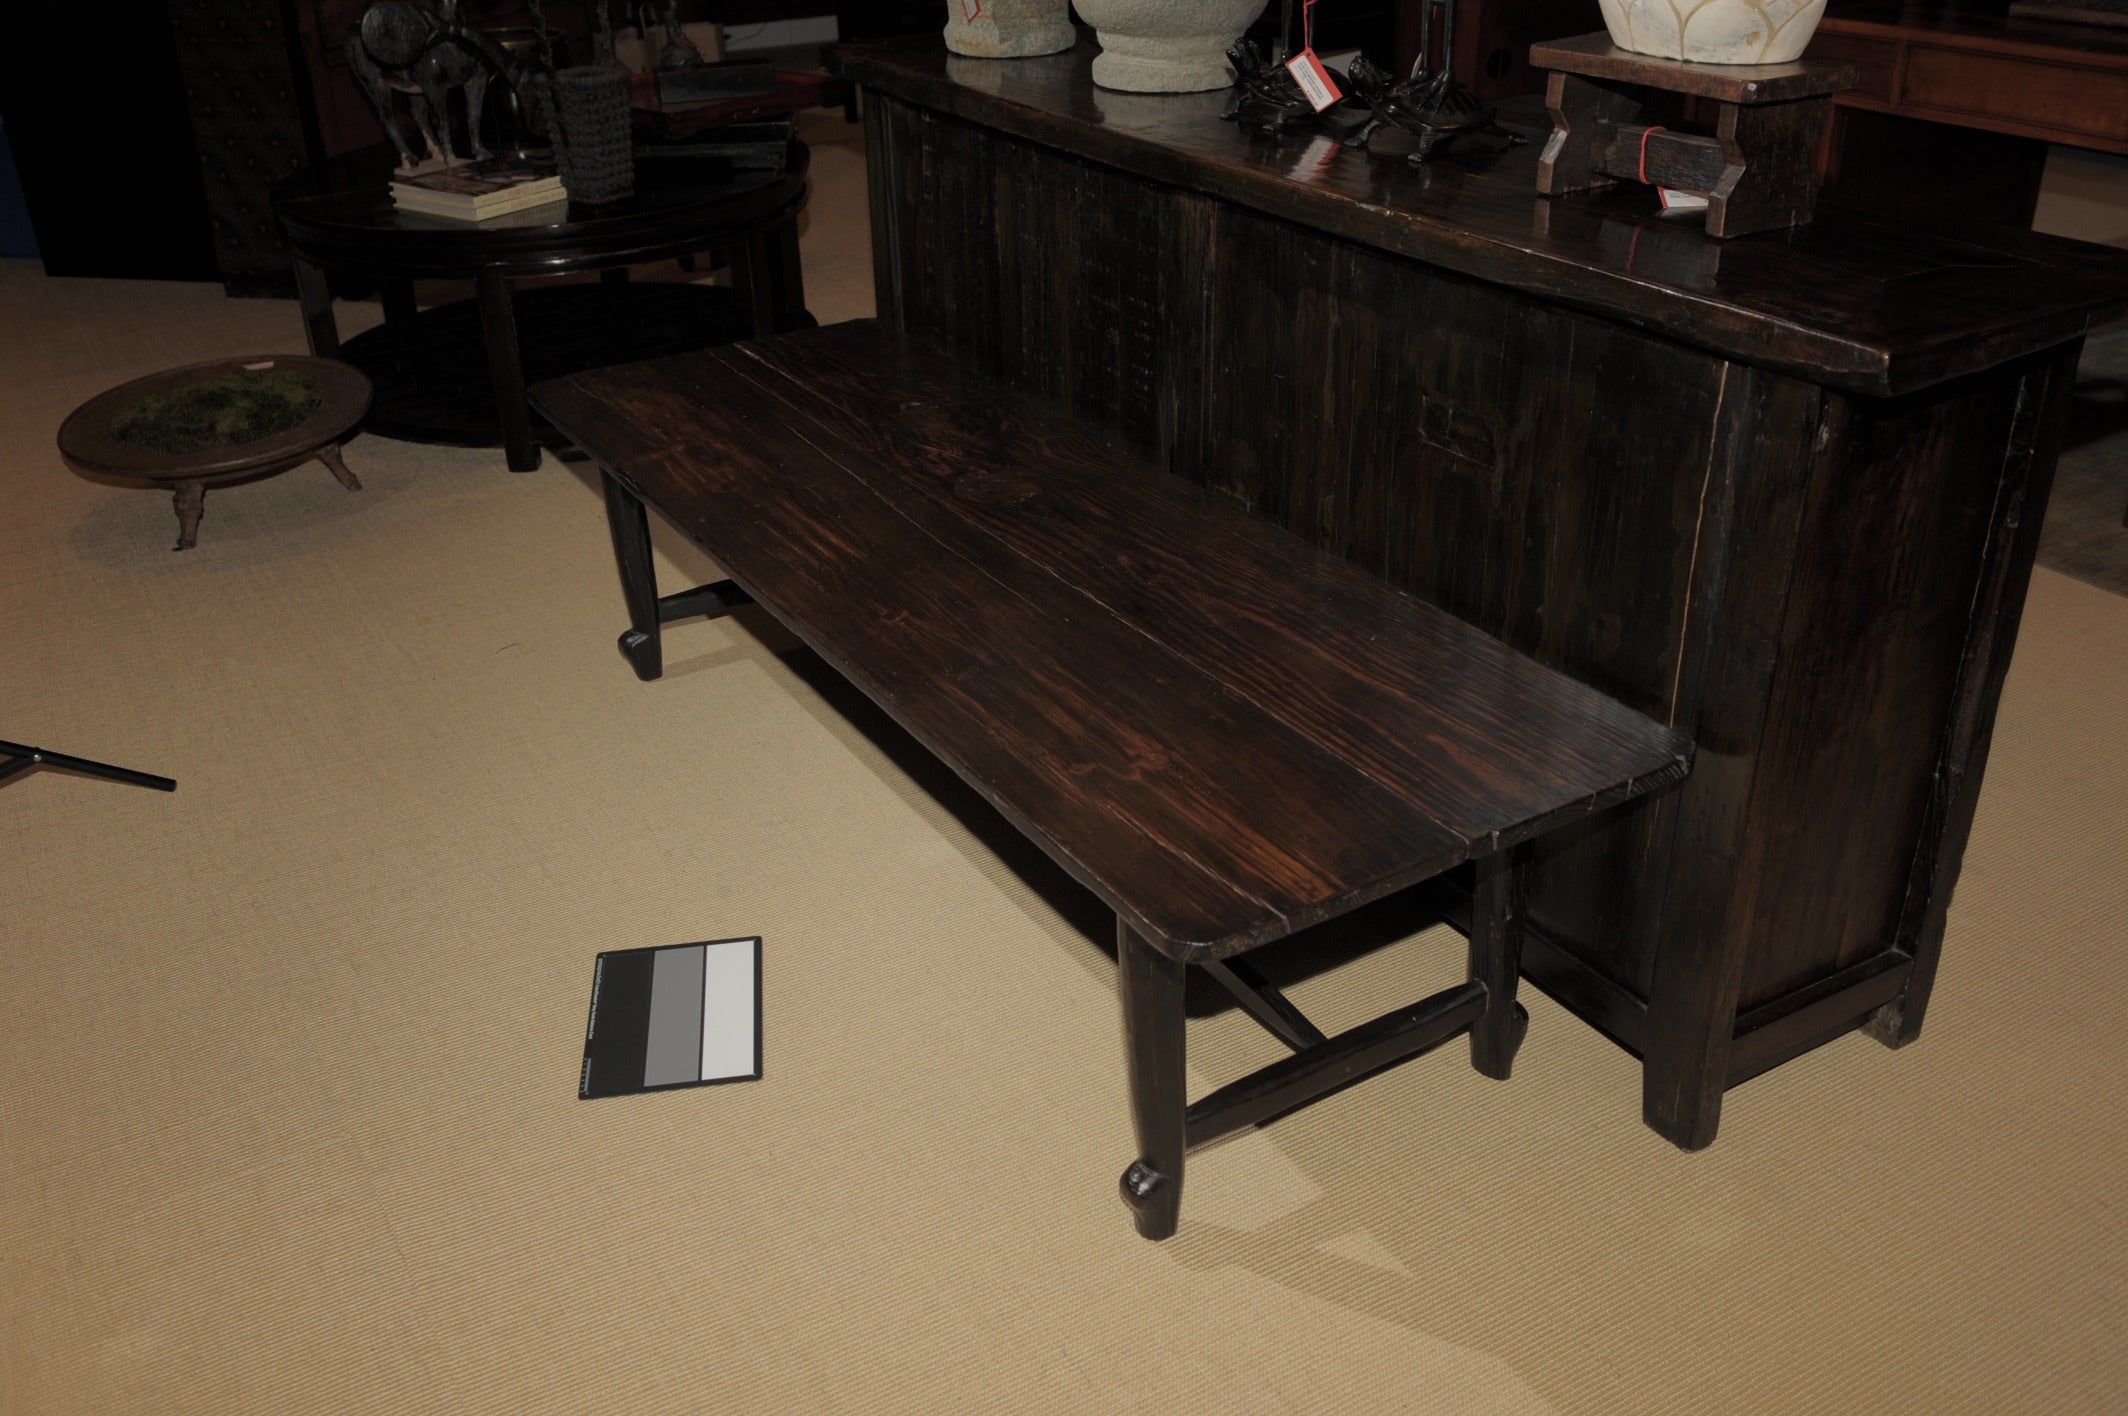 Pine wood bench from the Philippines. Functional as a bench or coffee table. Beautifully finished in dark tones.  c1920s   50842-171010